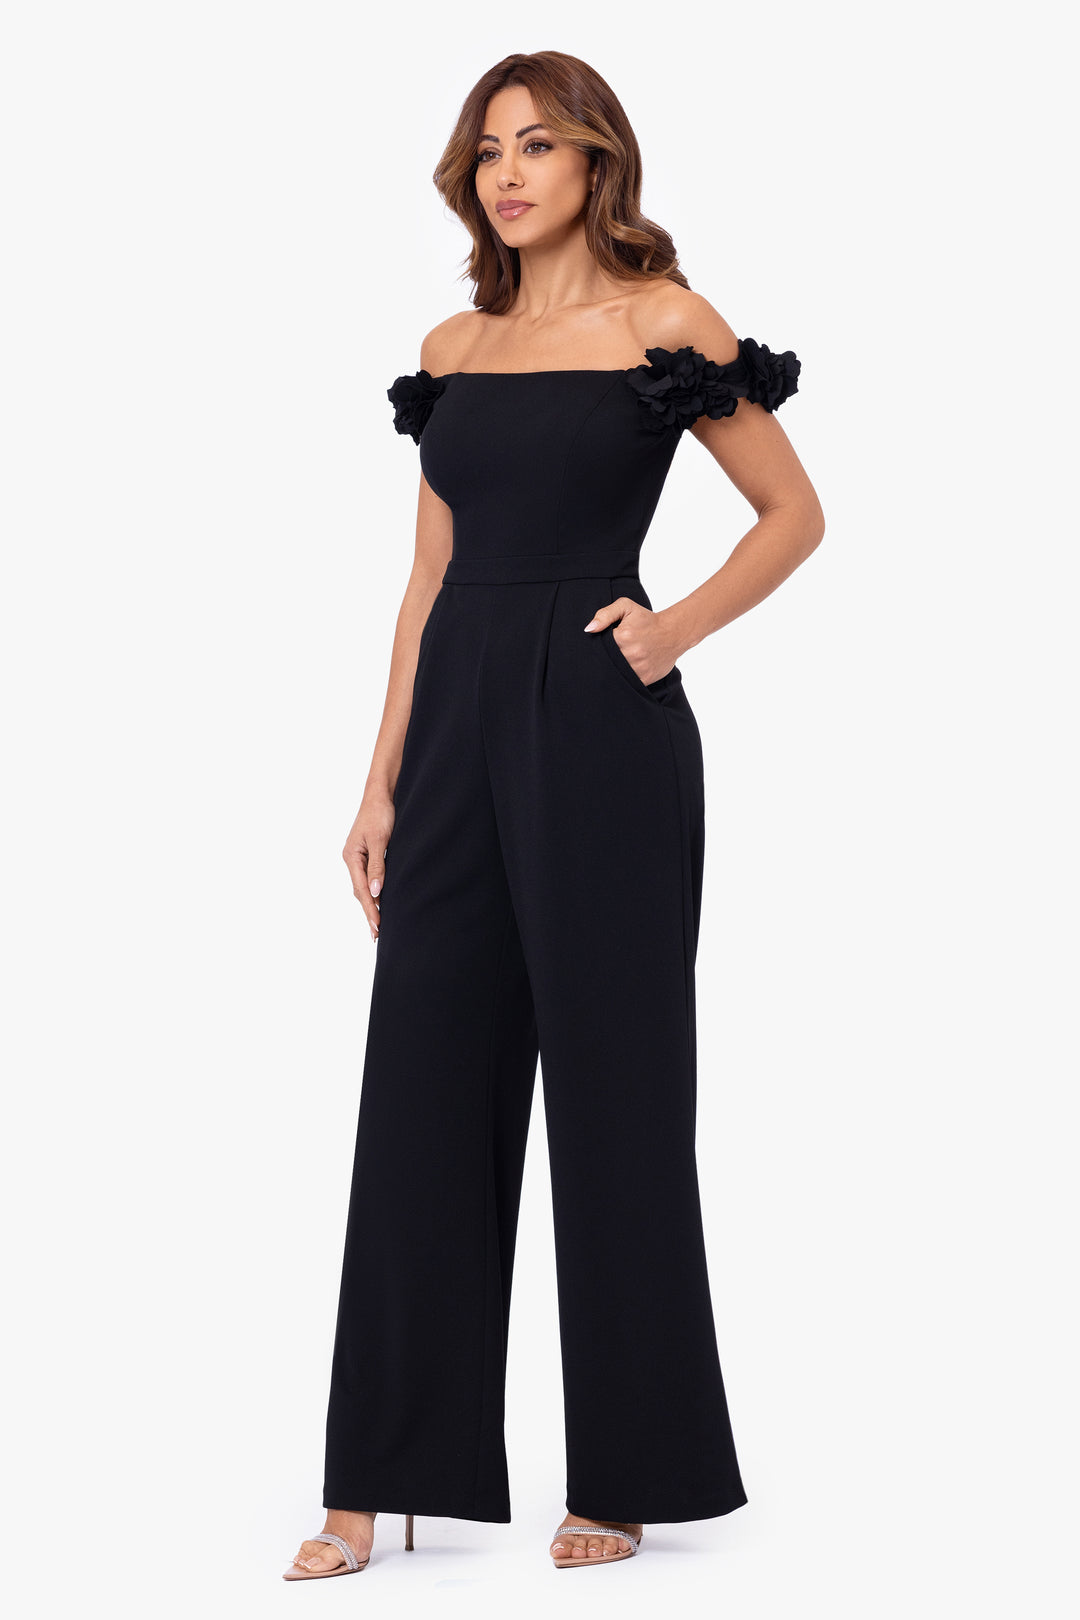 "Kimberly" Long Off the Shoulder Flower Sleeves Jumpsuit